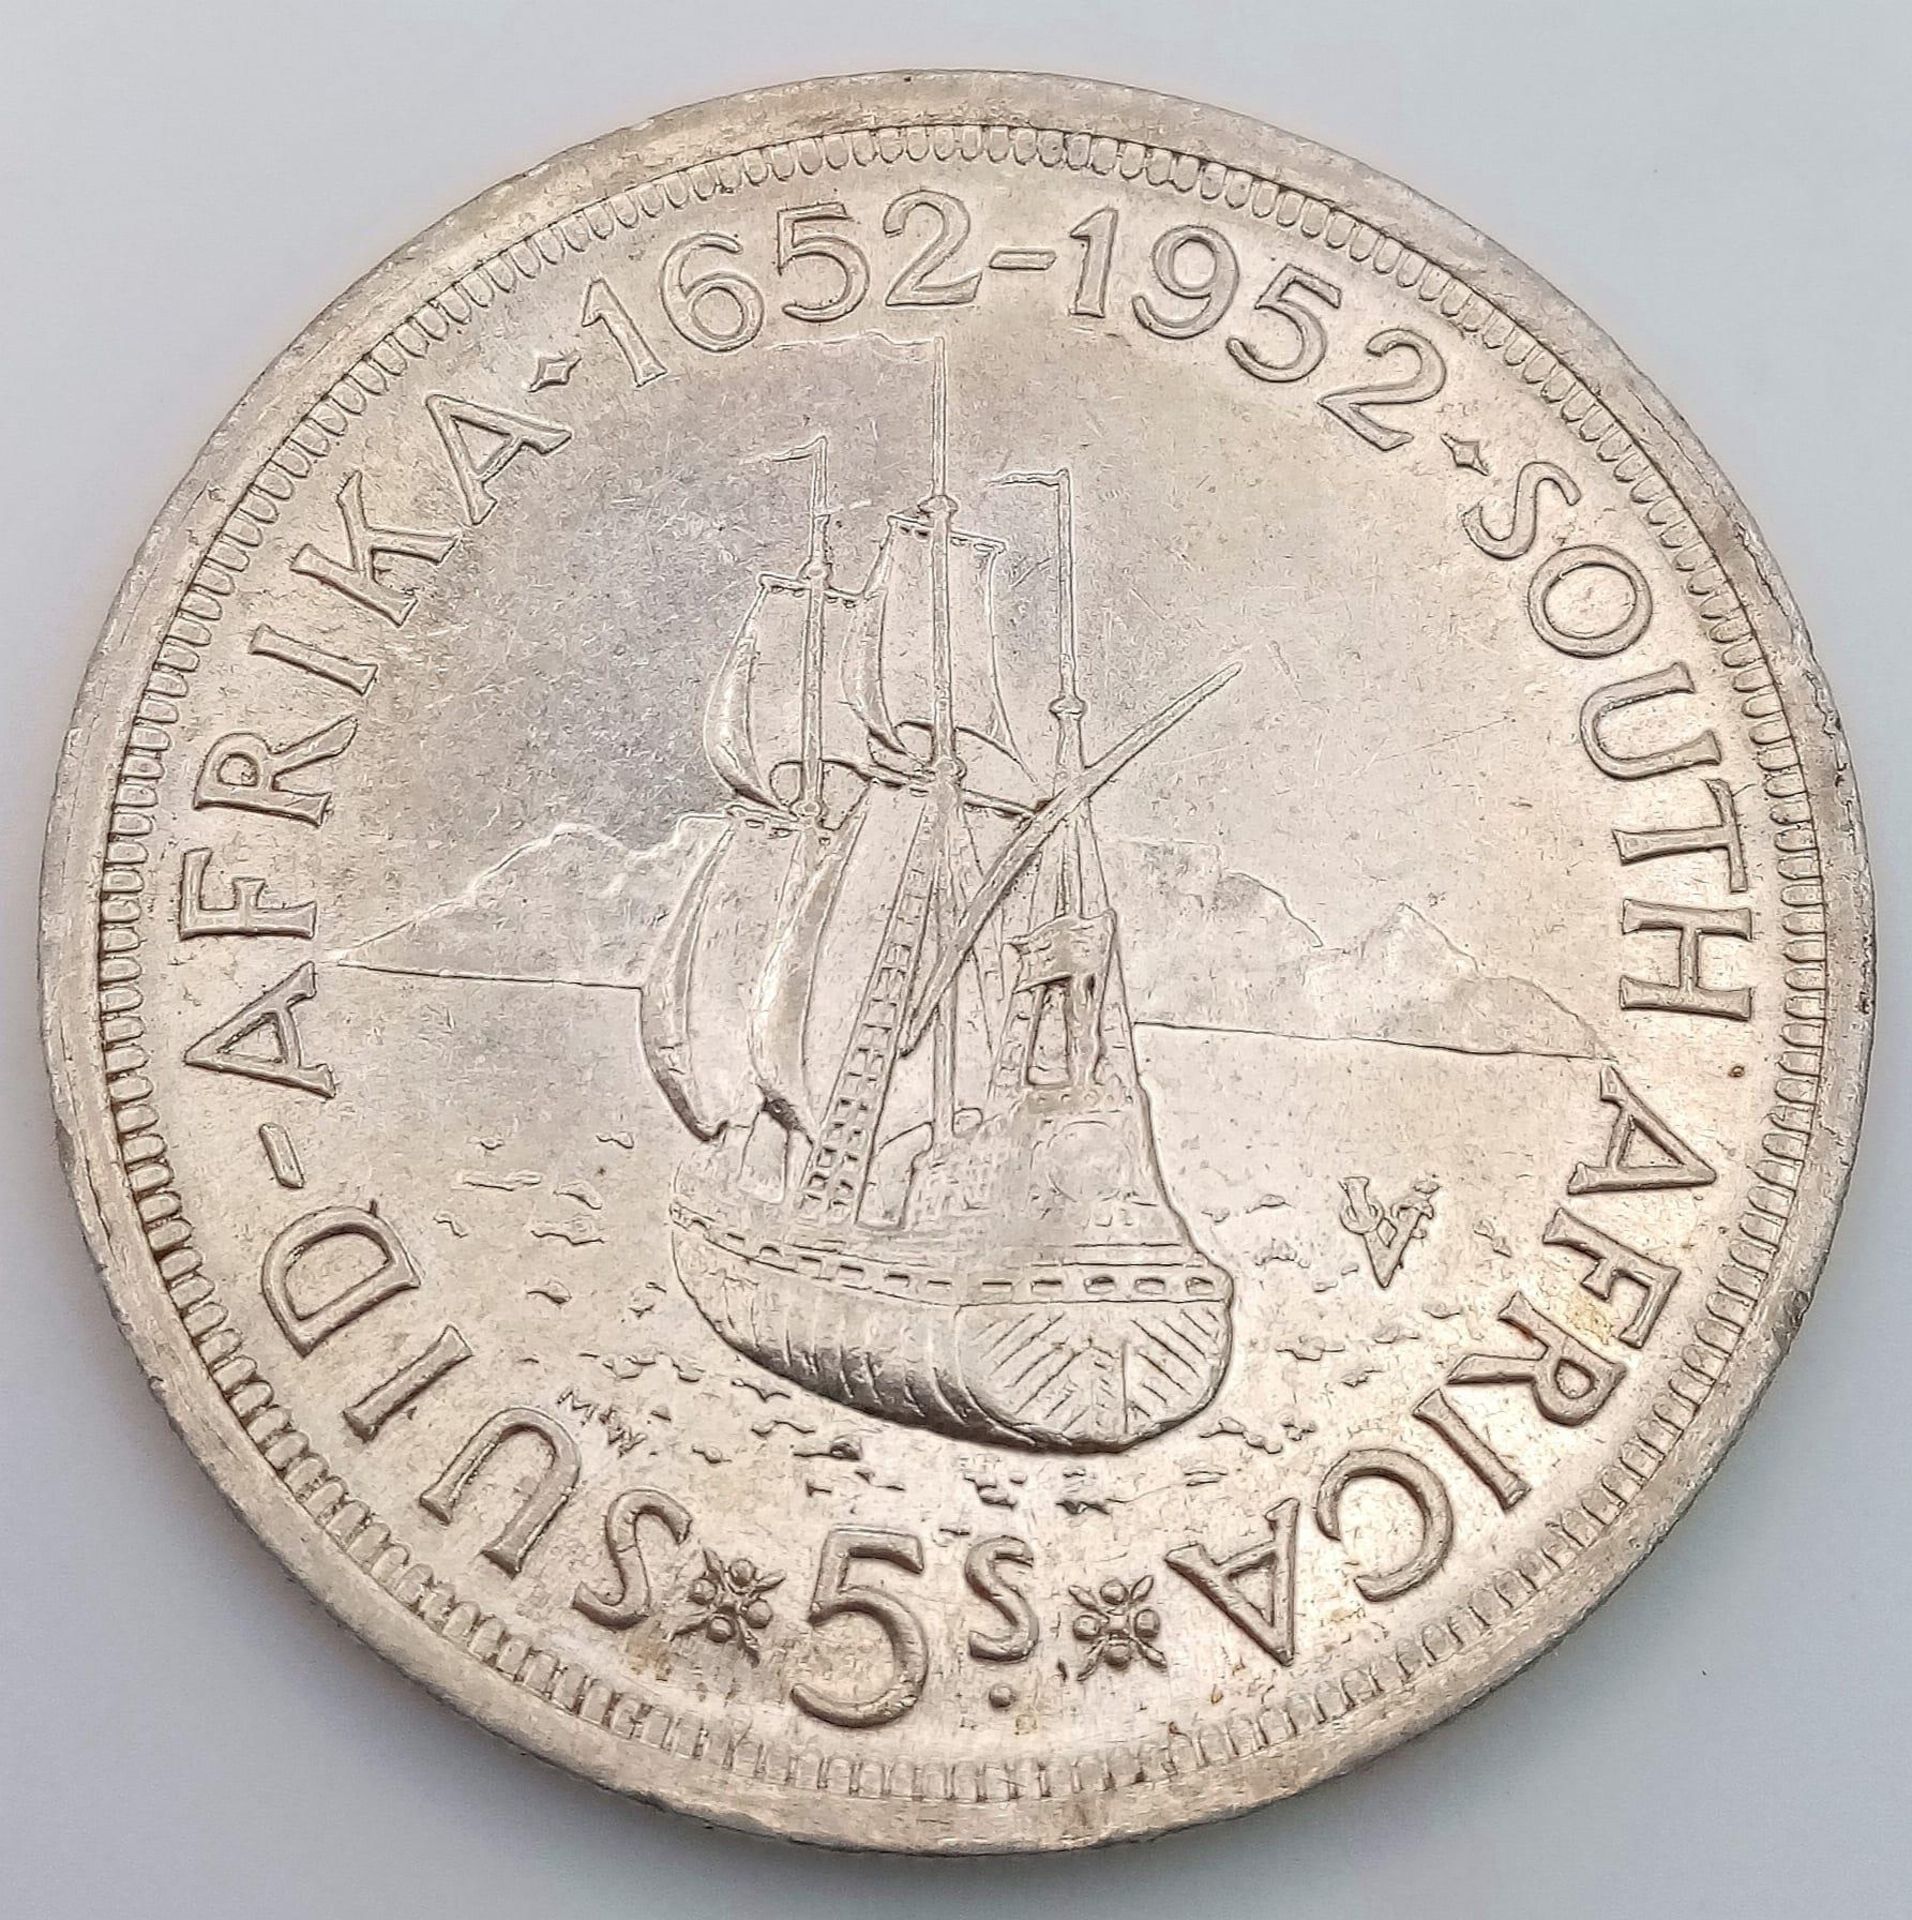 A 1952 South African Silver Crown.